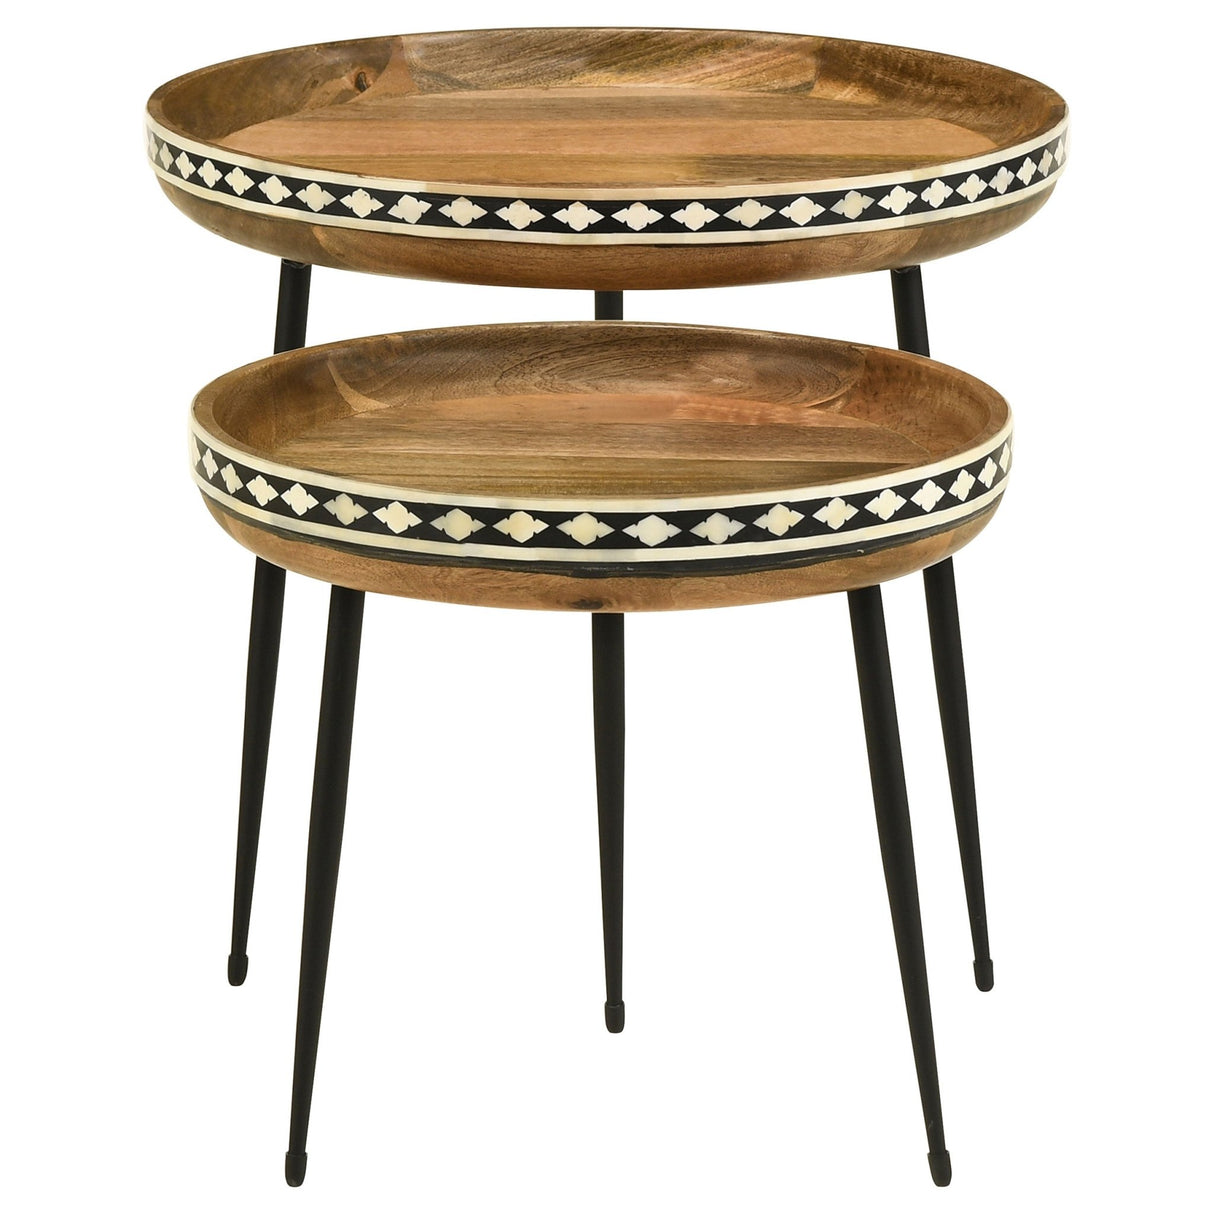 2 Pc Nesting Table - Ollie 2-piece Round Nesting Table Natural and Black